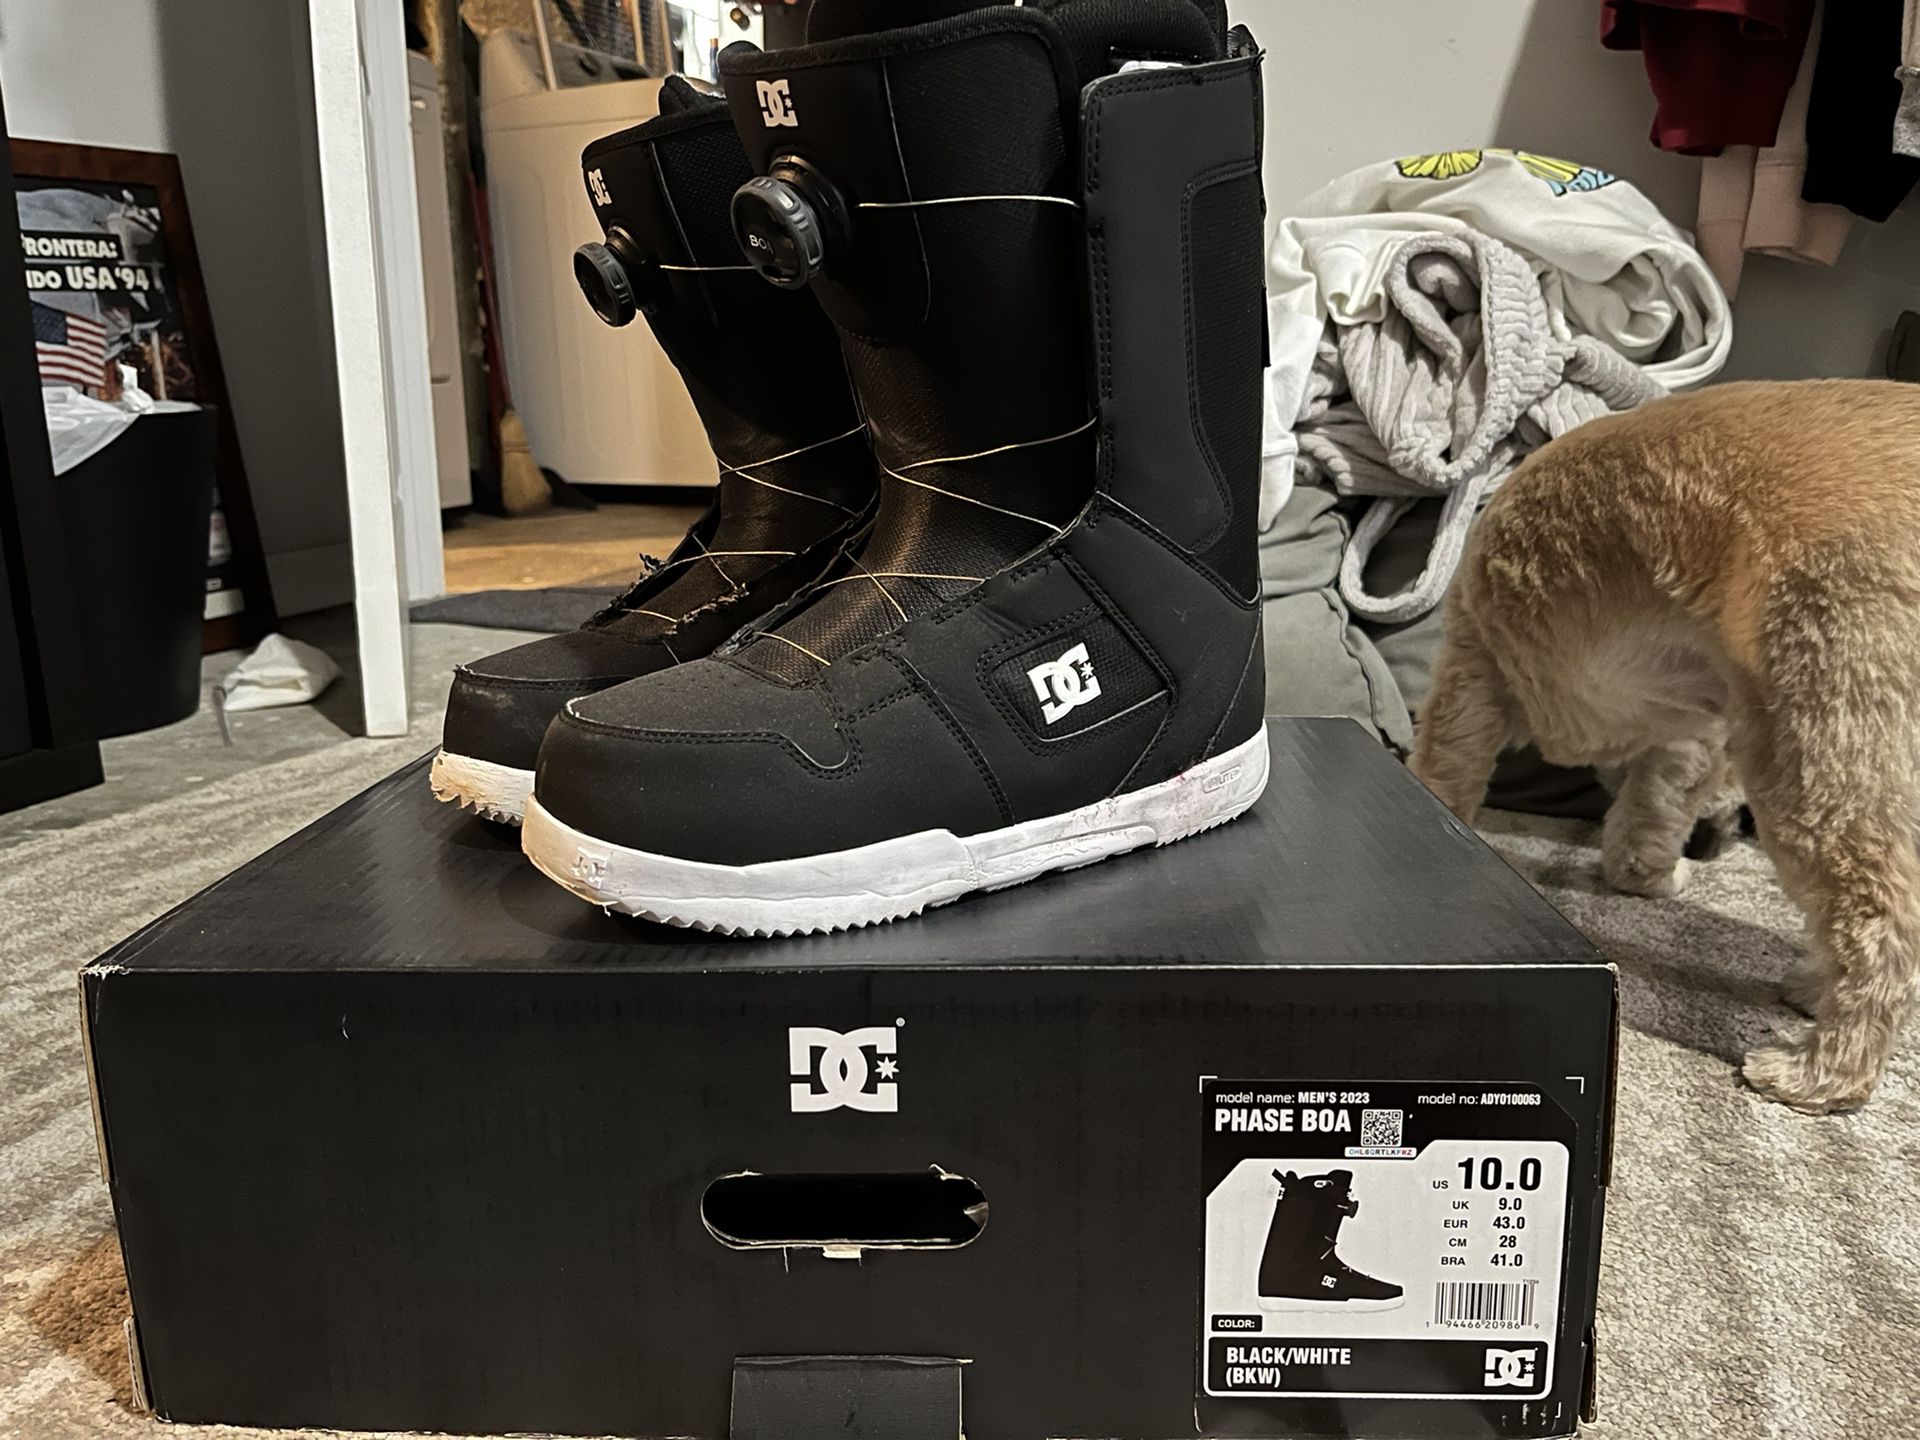 DC 2023 Phase BOA Size 10 Snowboard Boots for Sale in Pittsburgh, PA - OfferUp